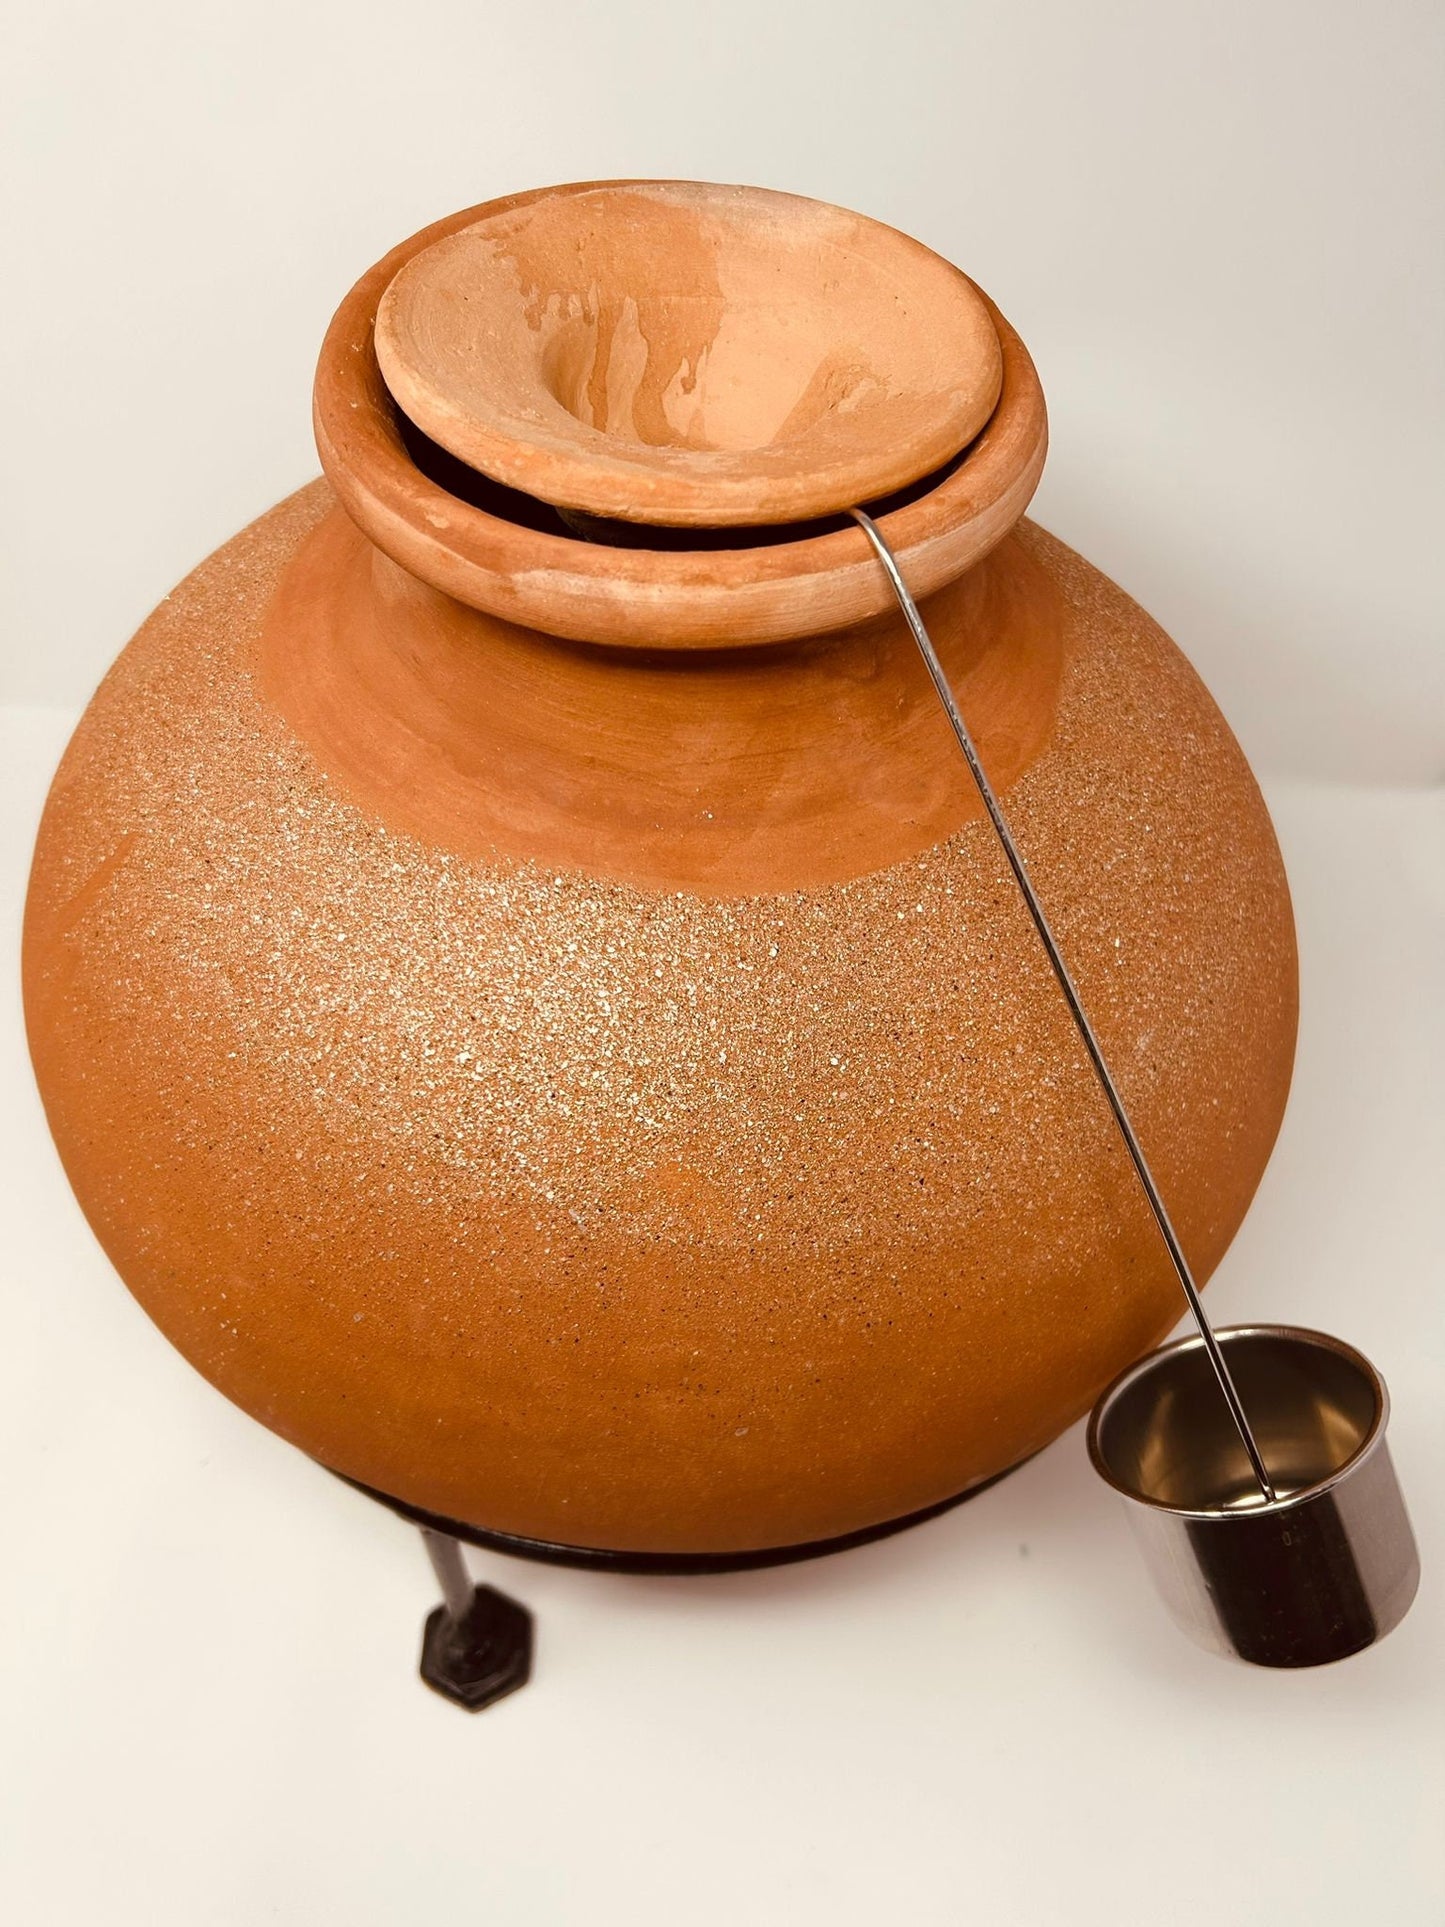 Clay Water Pitcher Set (Gharra with Stand and Dipper, 3.25 Gallons) UNGLAZED